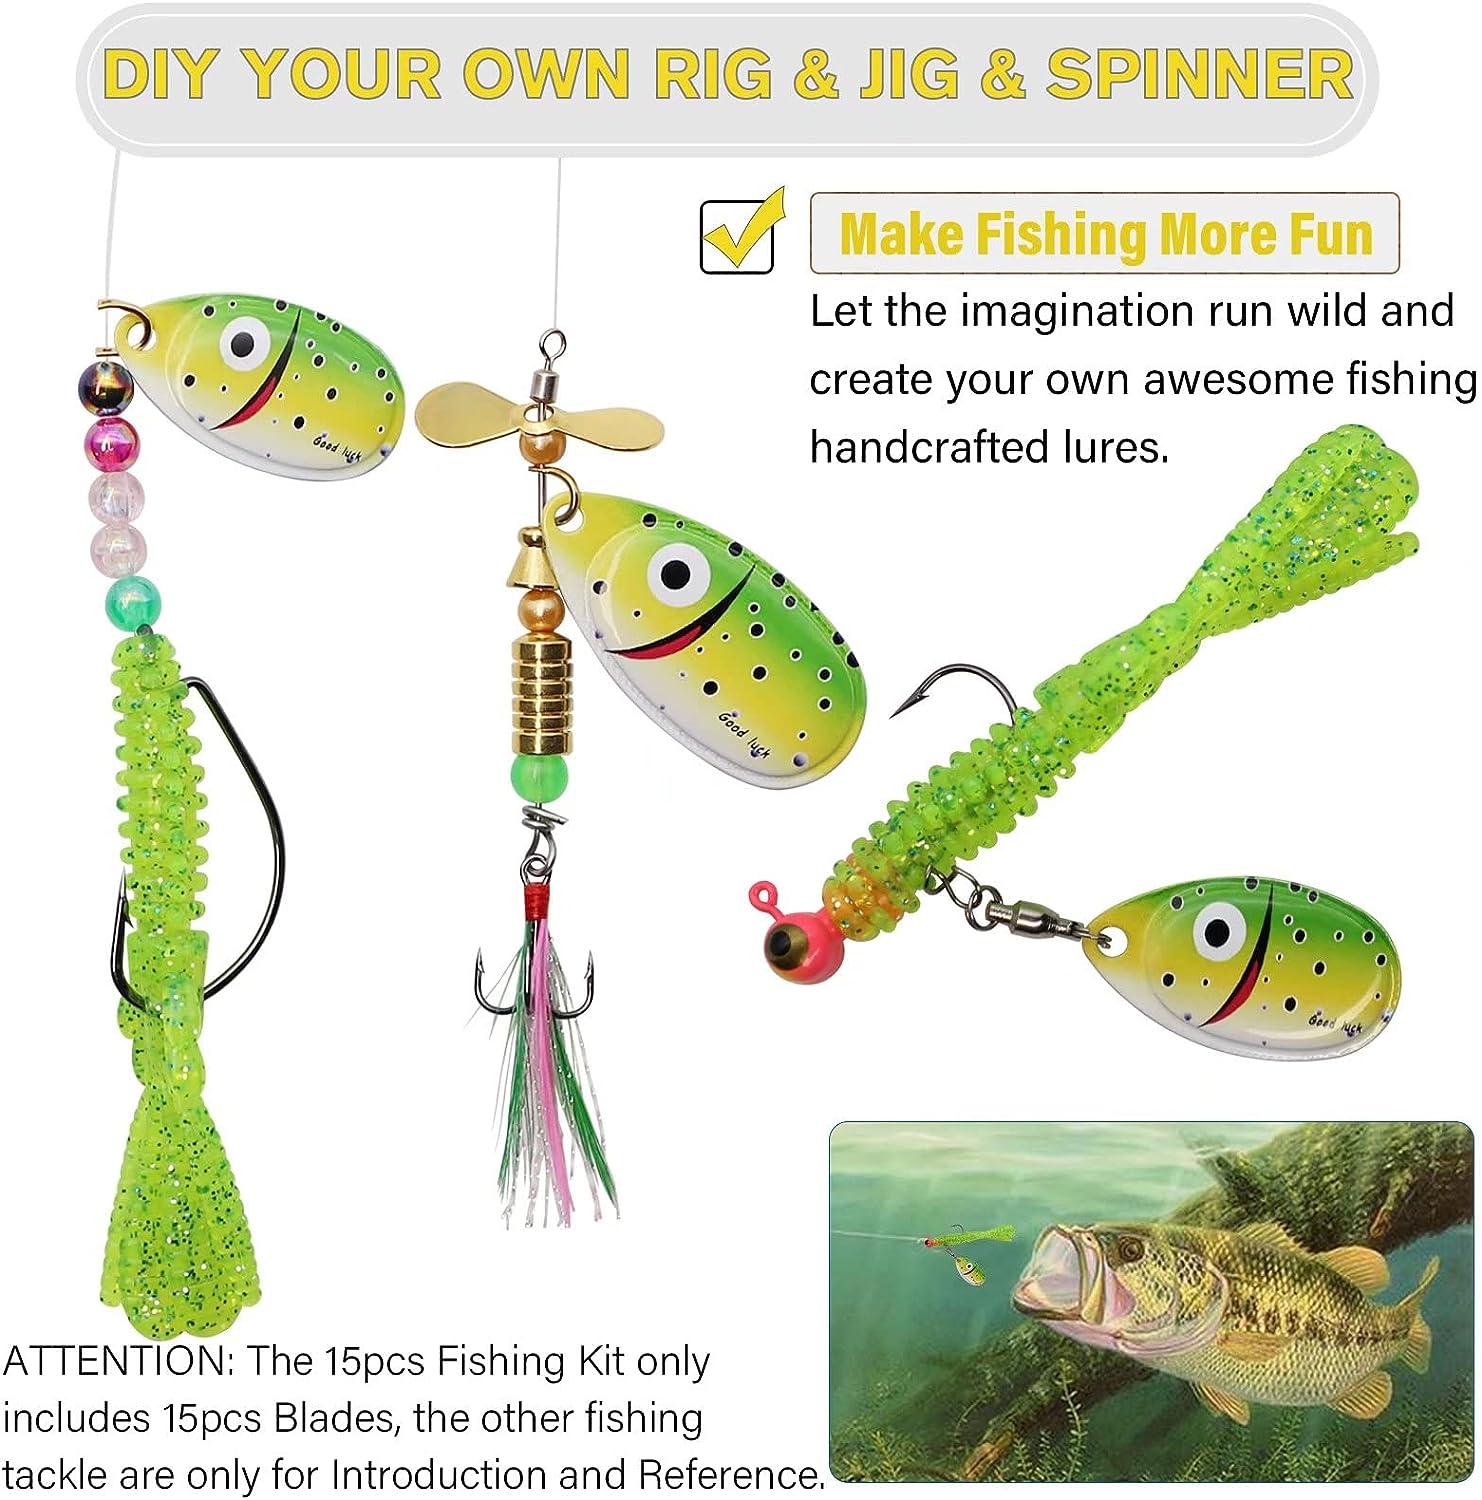 DIY Trout Lure: How to Make an Inline Lure for Trout 